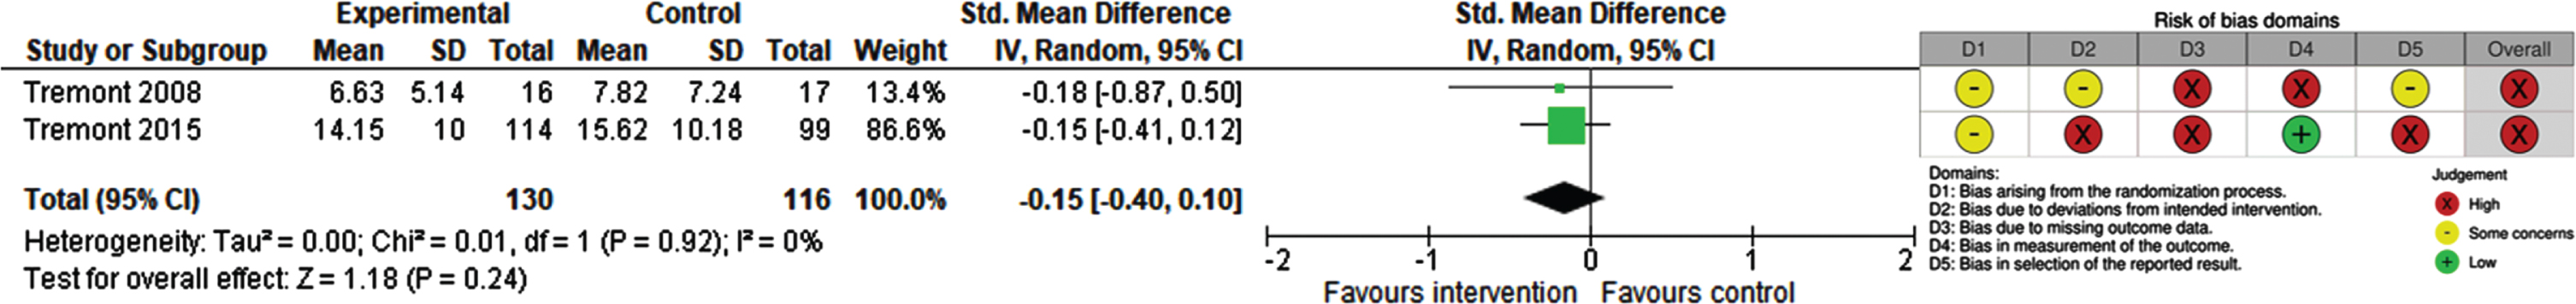 Forest Plot and RoB 2 for depressive symptoms experienced by carers of people with dementia.